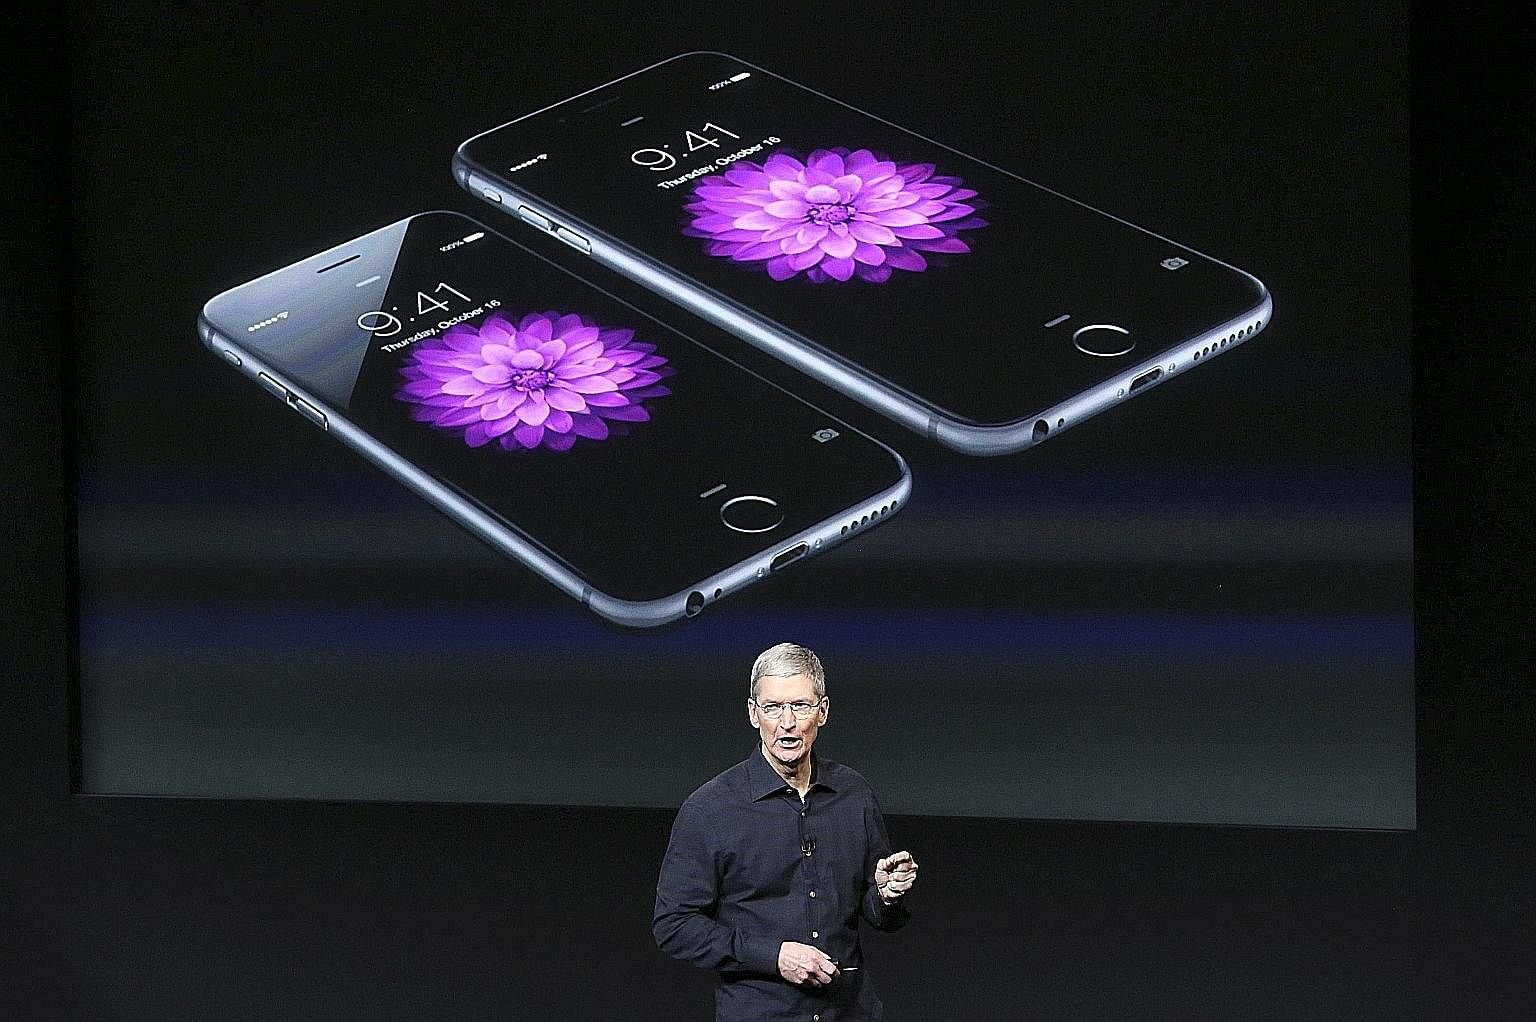 Apple CEO Tim Cook with a screen displaying the iPhone 6 during a presentation at Apple headquarters in Cupertino, California, in an Oct 16, 2014 file photo. Previously, under Mr Steve Jobs, Apple had a track record of cannibalising its own products.